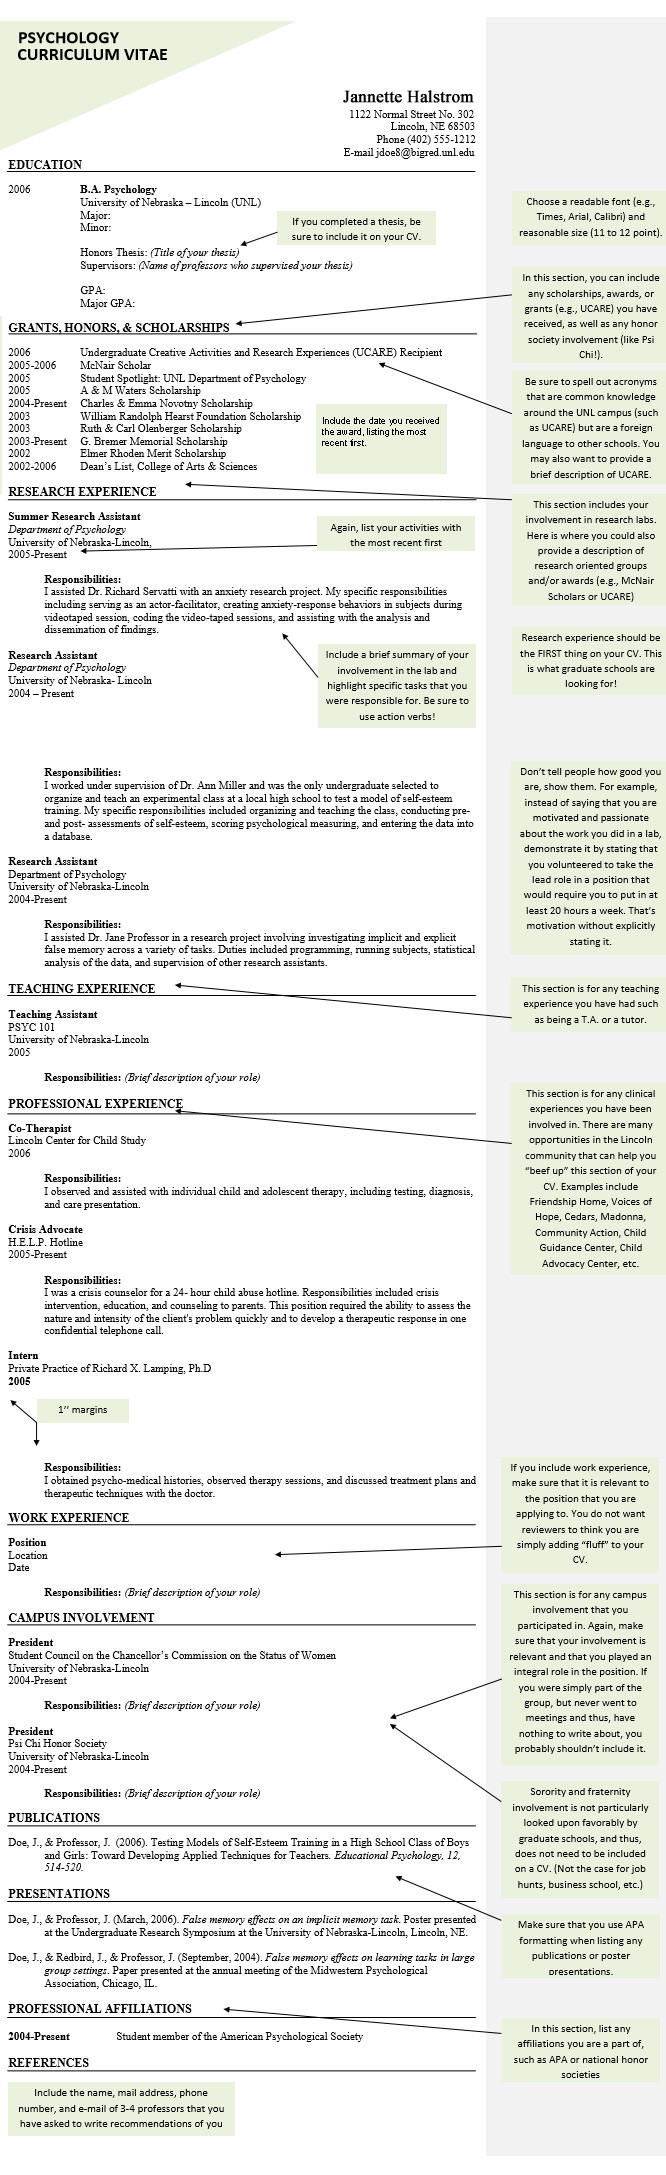 Latest Resume Samples for Industrial and organizational Psychologist Psychology Cv and Resume Samples, Templates and Tips